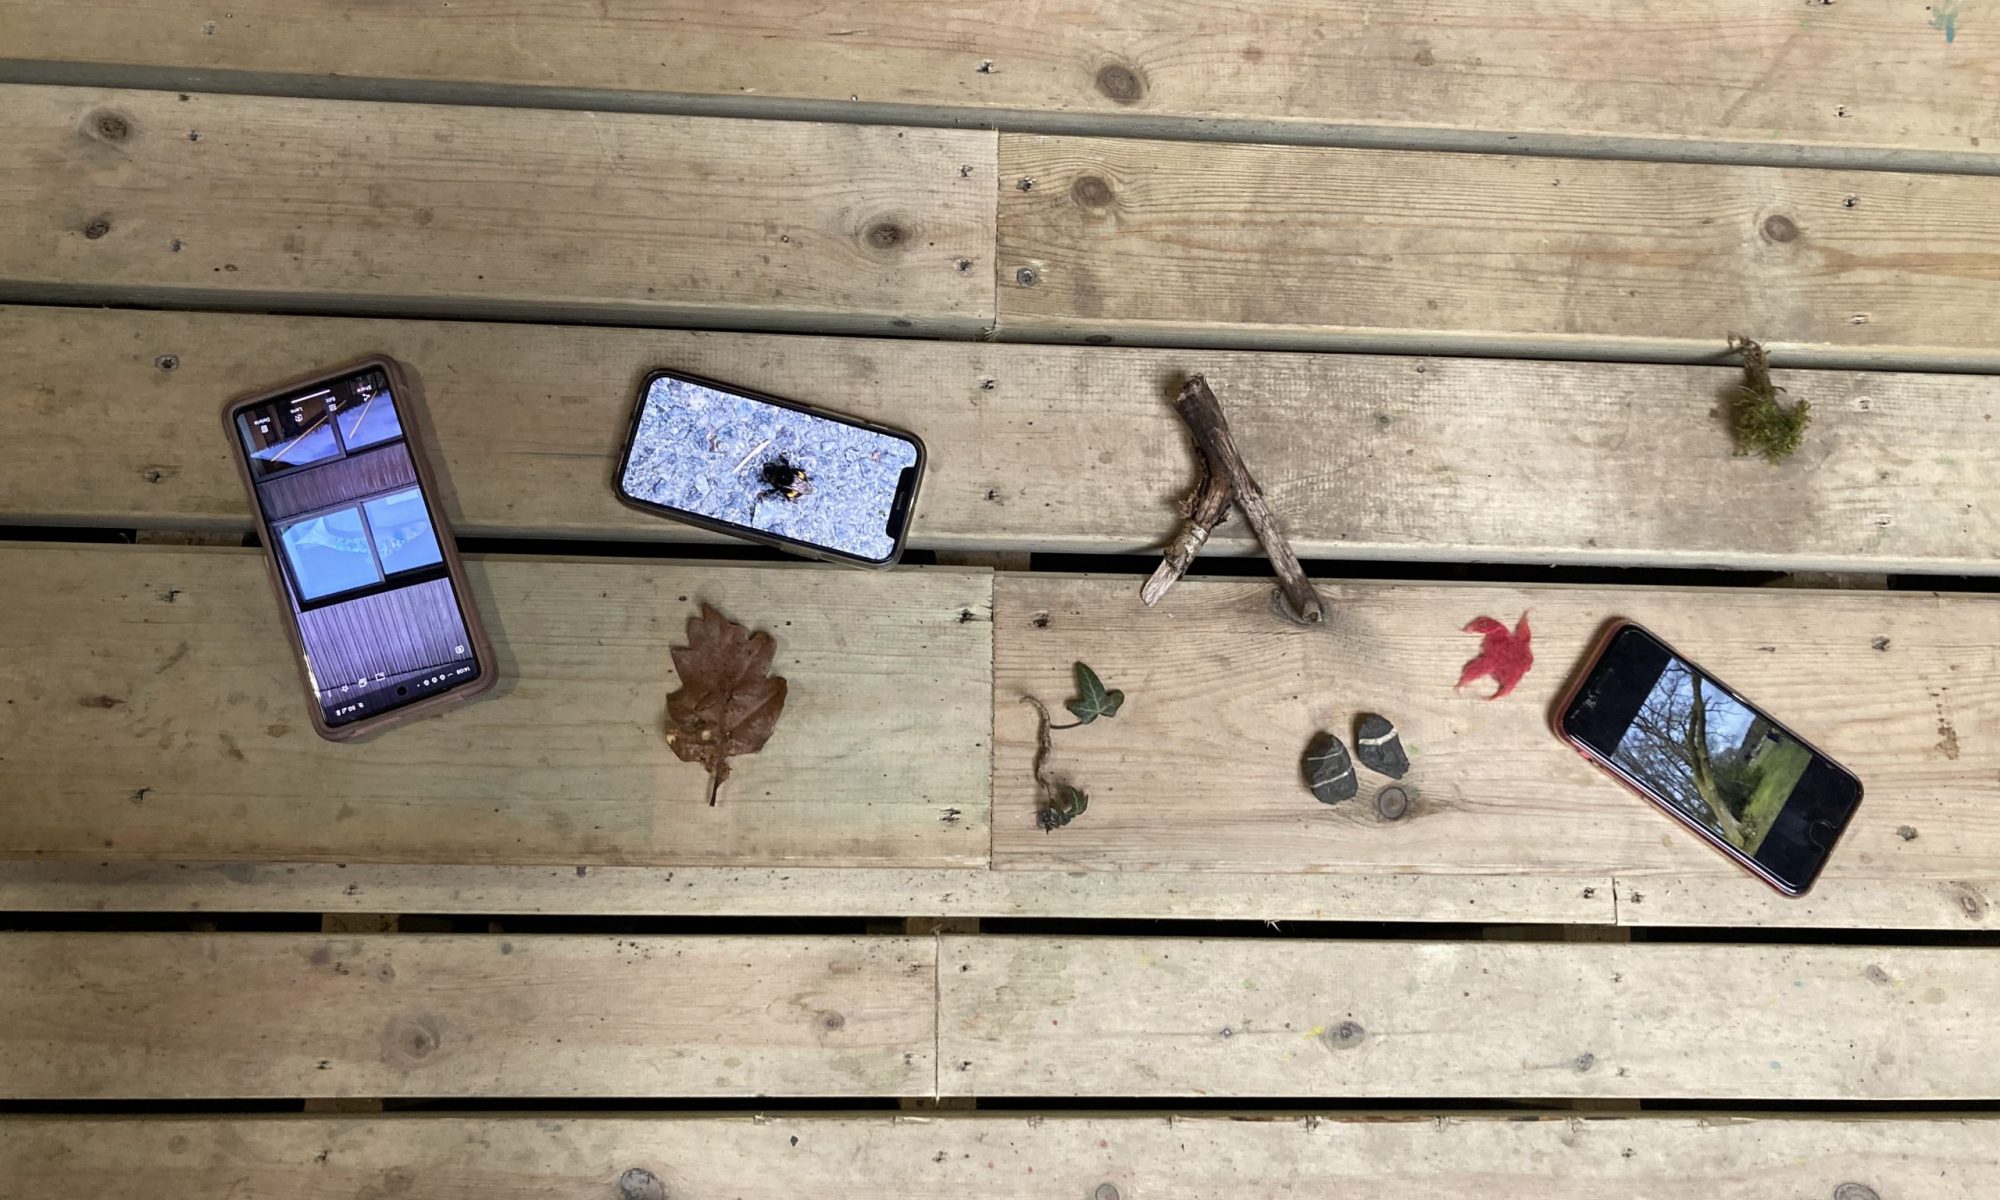 An image capturing phones, with there screens on, lay down on wooden plank flooring, alongside leaves and branches.